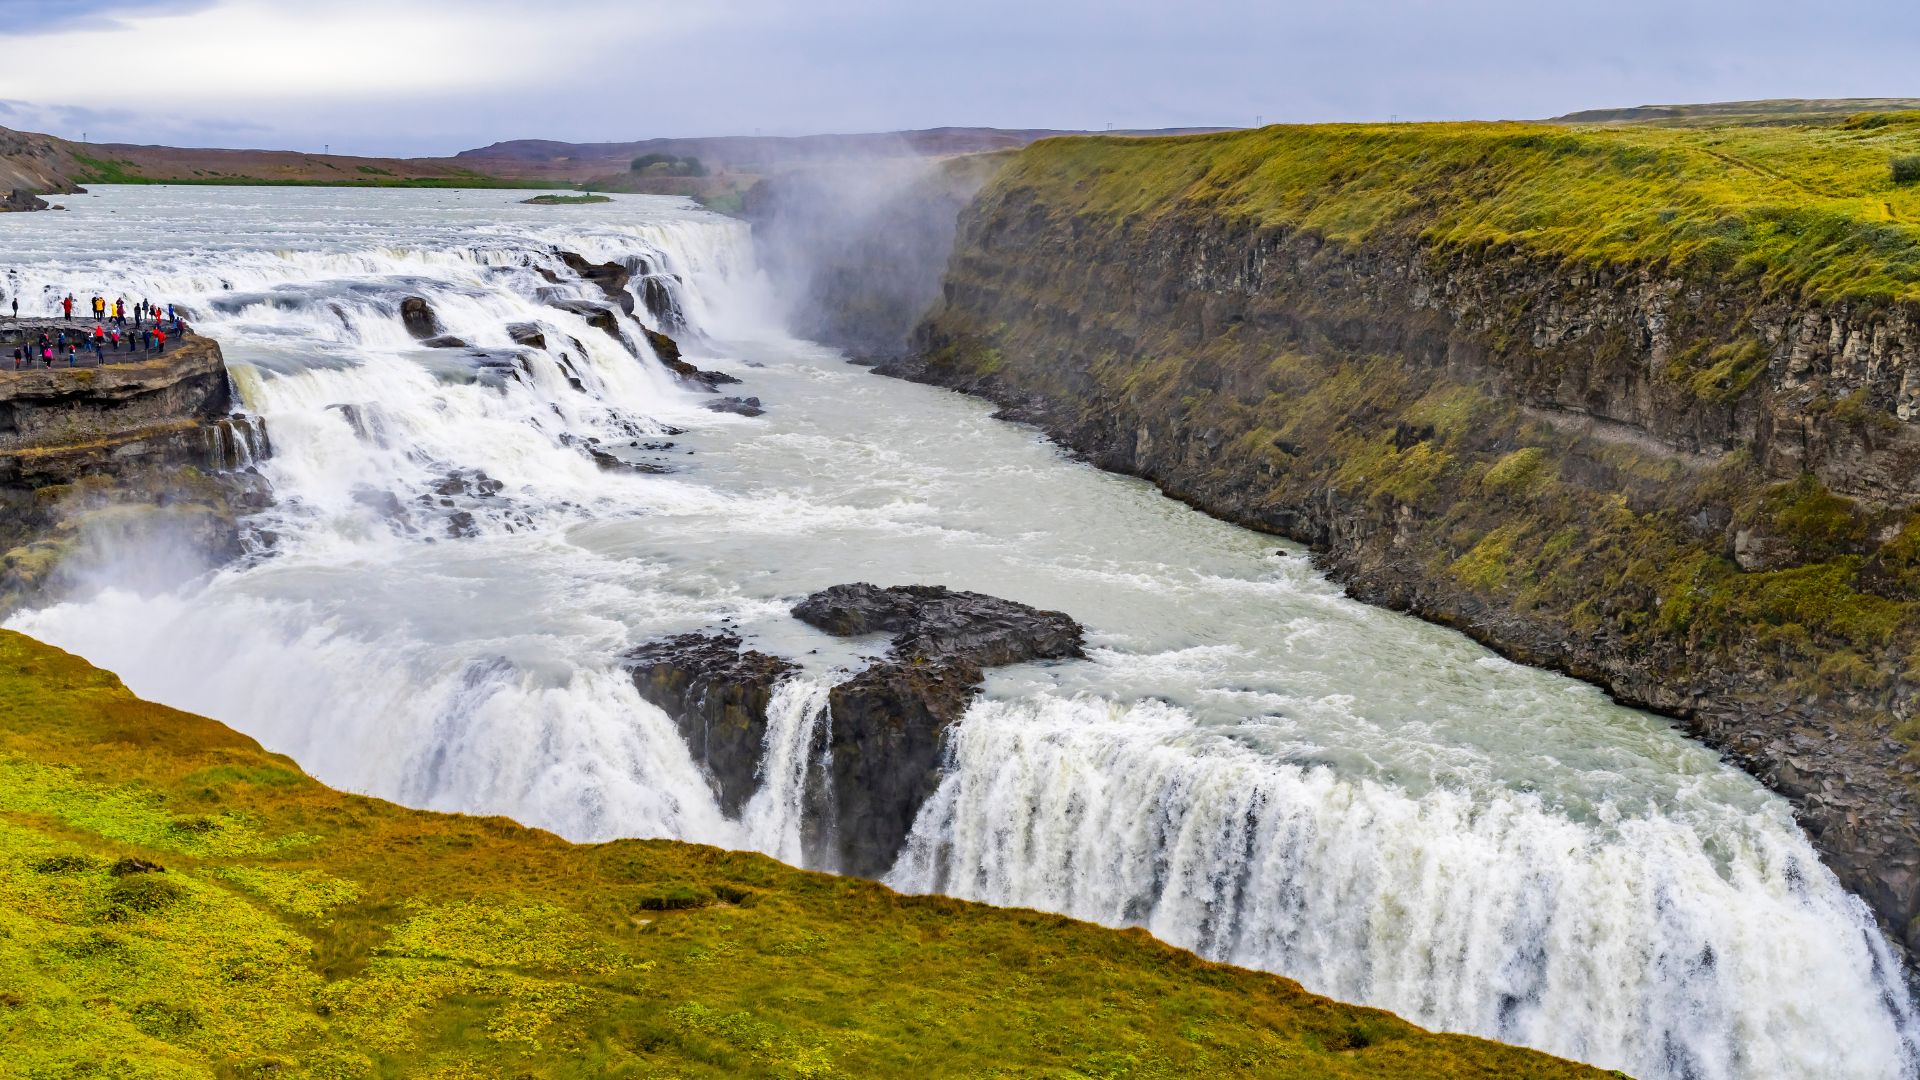 Gullfoss Waterfall or The Golden Waterfall is a part of the Golden Circle in Iceland